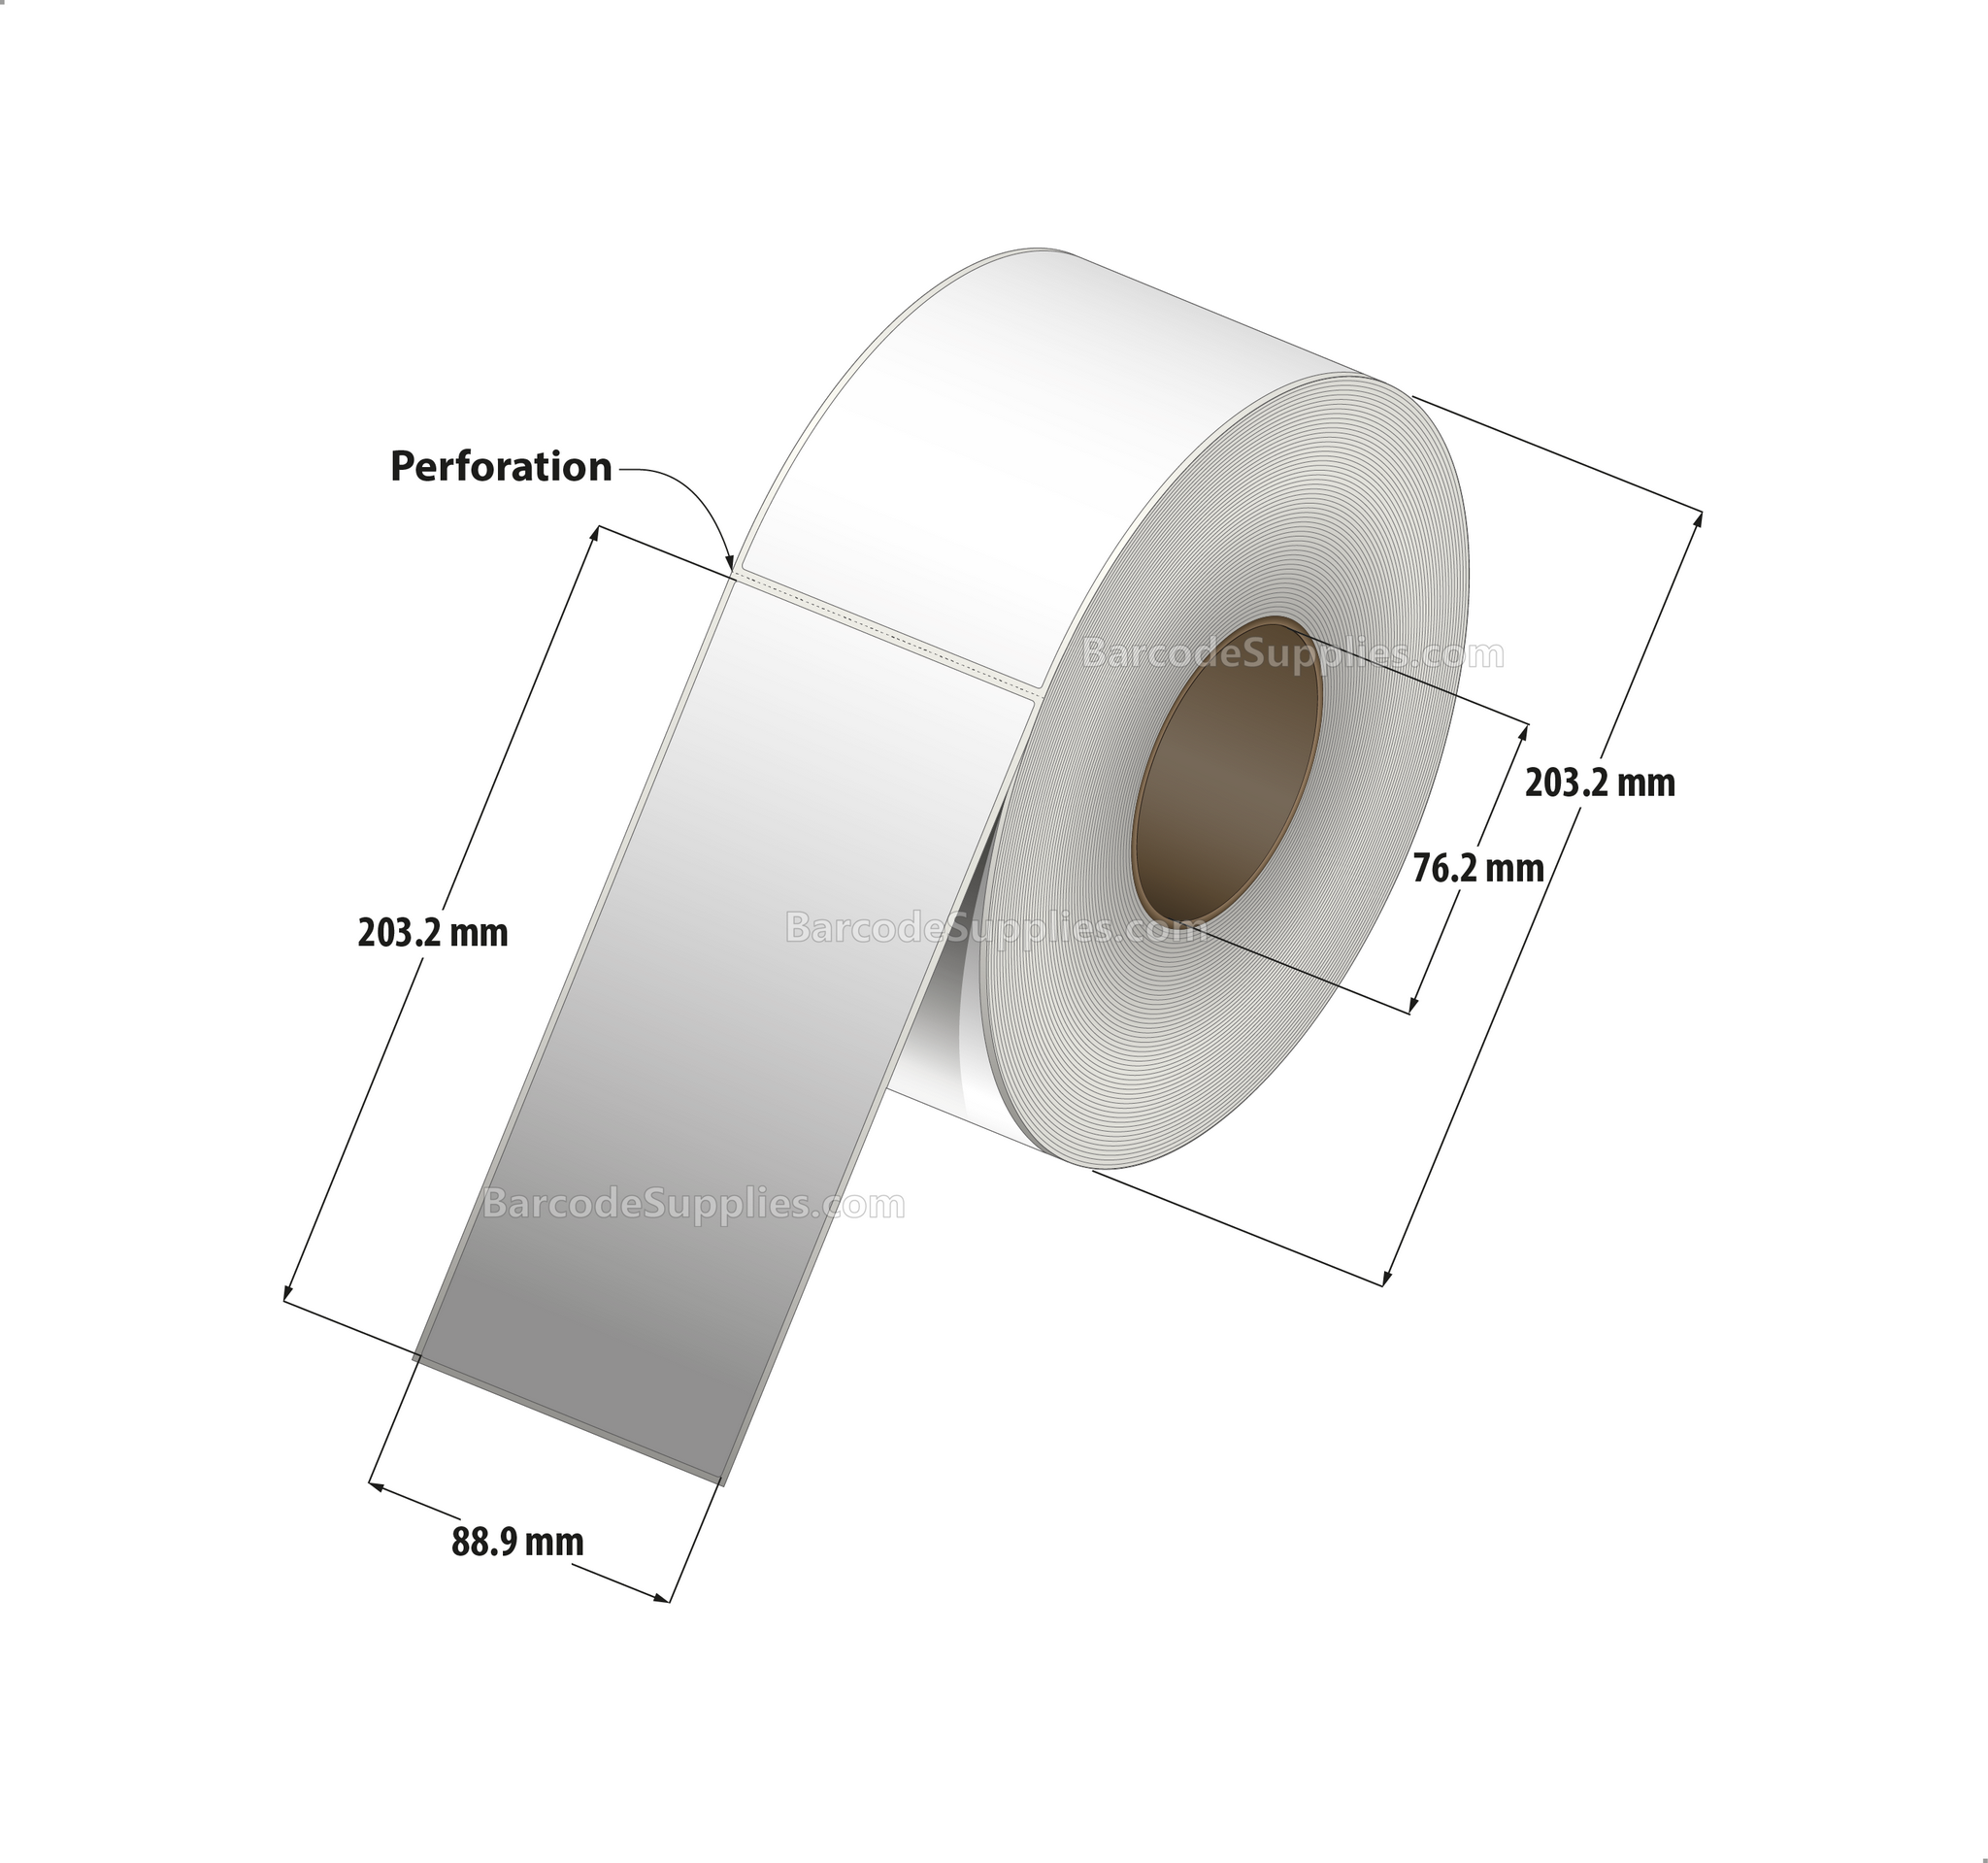 3.5 x 8 Thermal Transfer White Labels With Permanent Acrylic Adhesive - Perforated - 750 Labels Per Roll - Carton Of 6 Rolls - 4500 Labels Total - MPN: TH358-1P